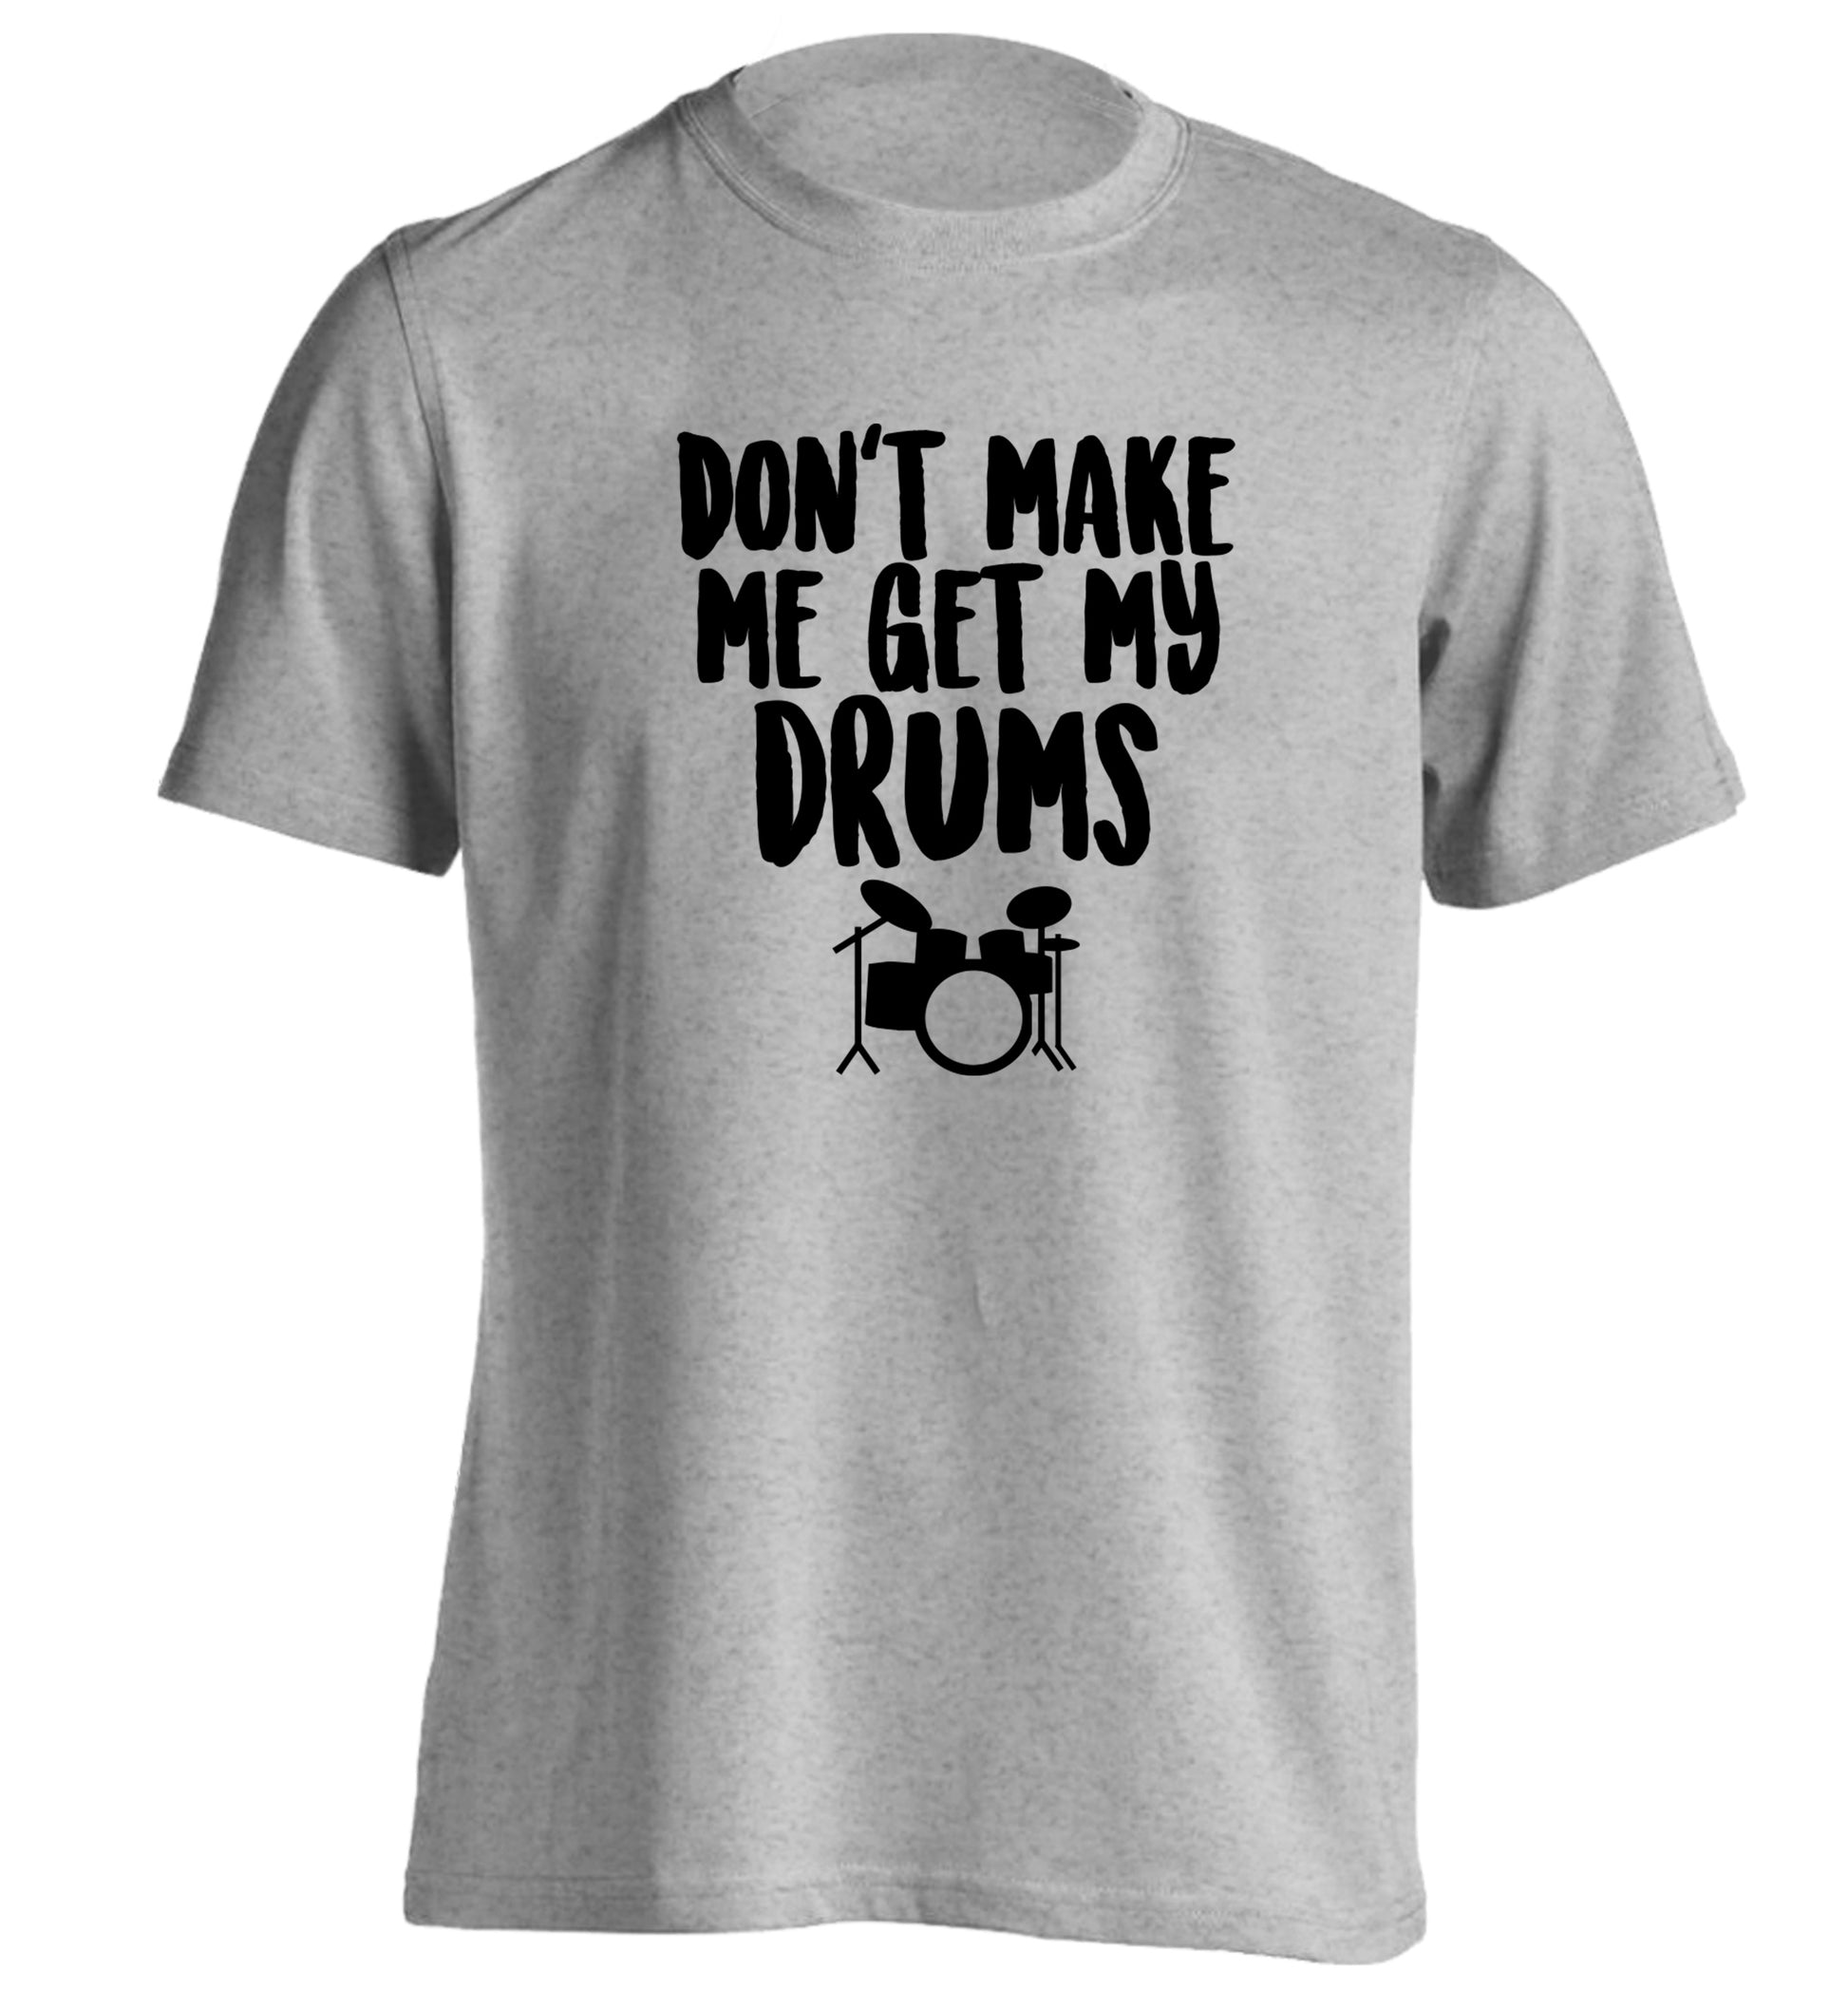 Don't make me get my drums adults unisex grey Tshirt 2XL